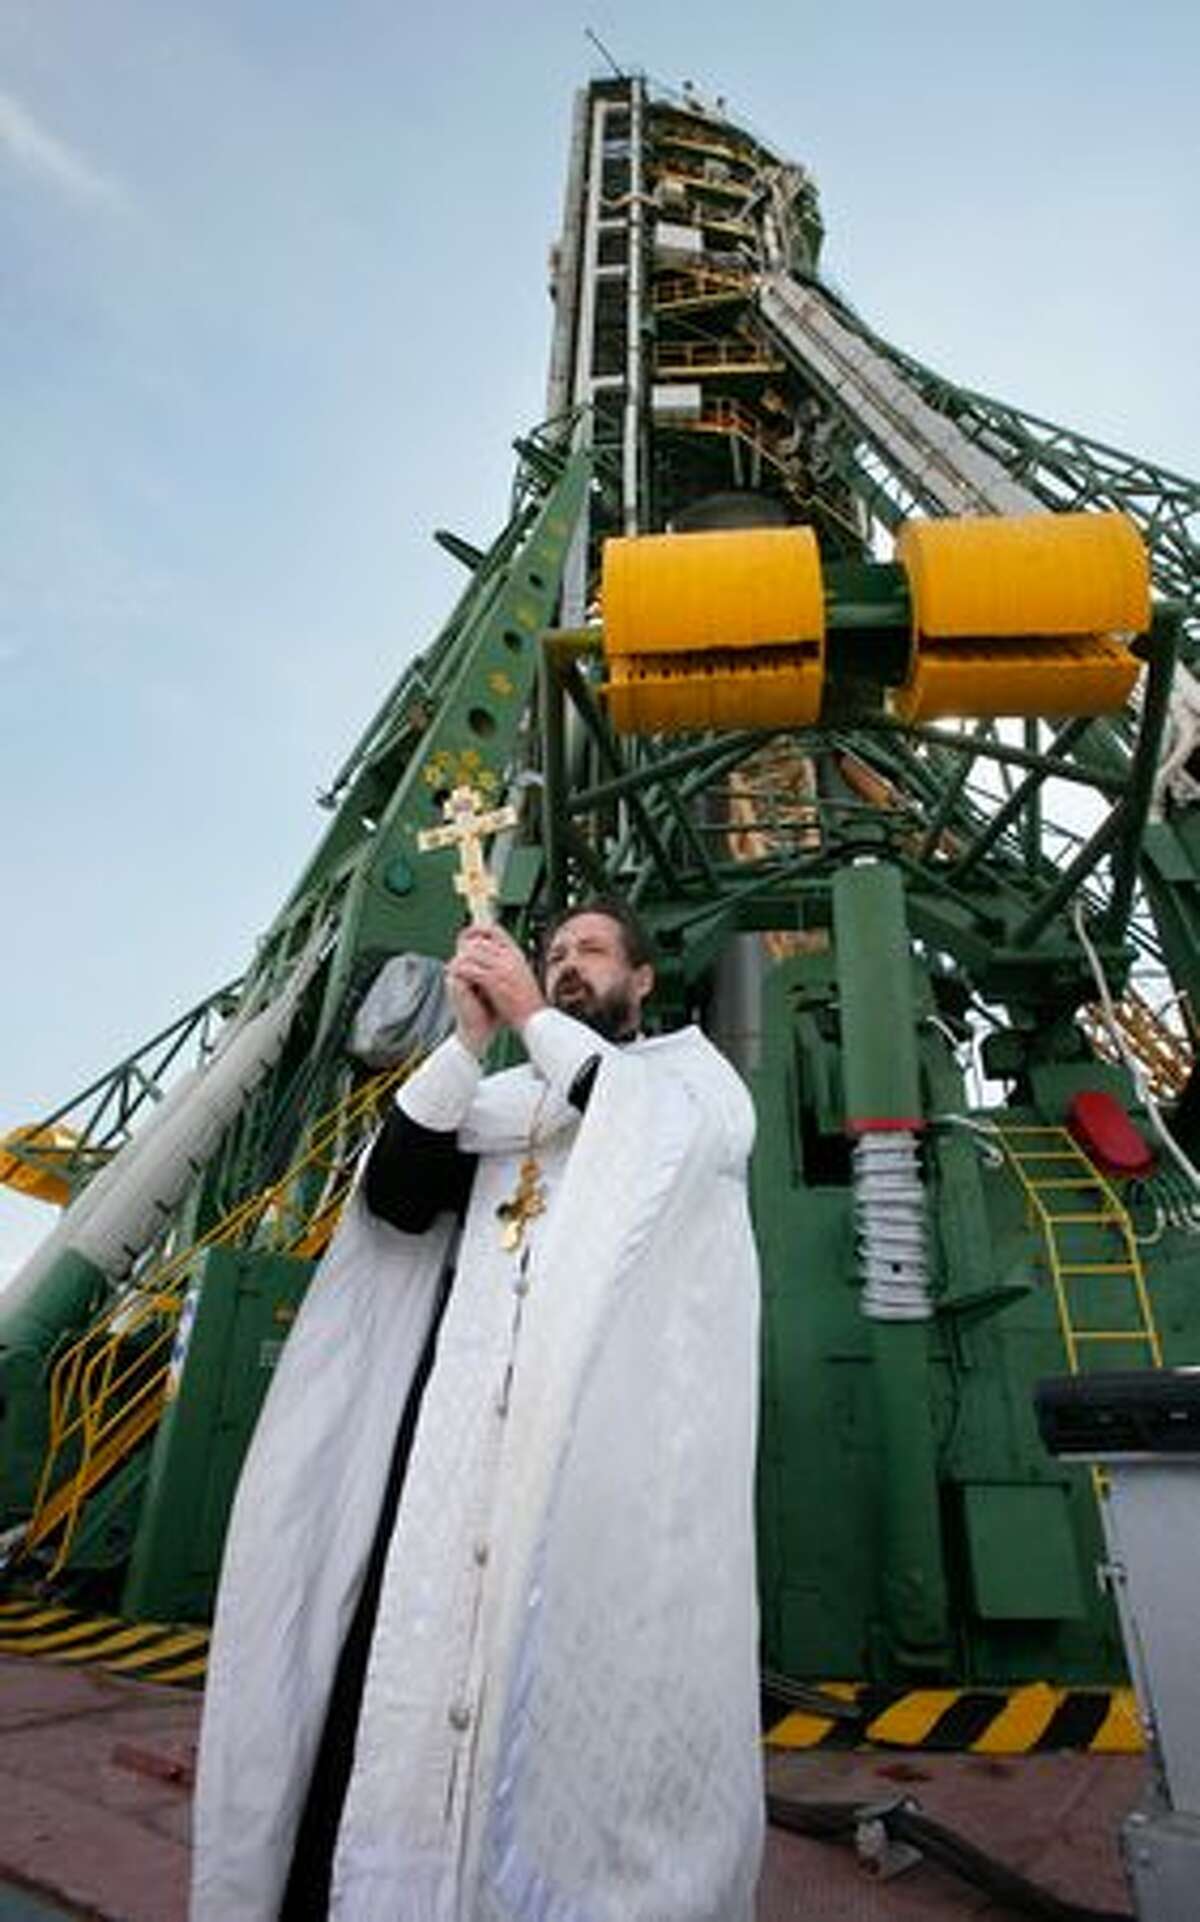 An Orthodox priest blesses specialists and the Russian Soyuz TMA-01M spacecraft that will carry a new crew to the international space station at the launch pad at the Russian leased Baikonur cosmodrome in Kazakhstan, on October 6, 2010.